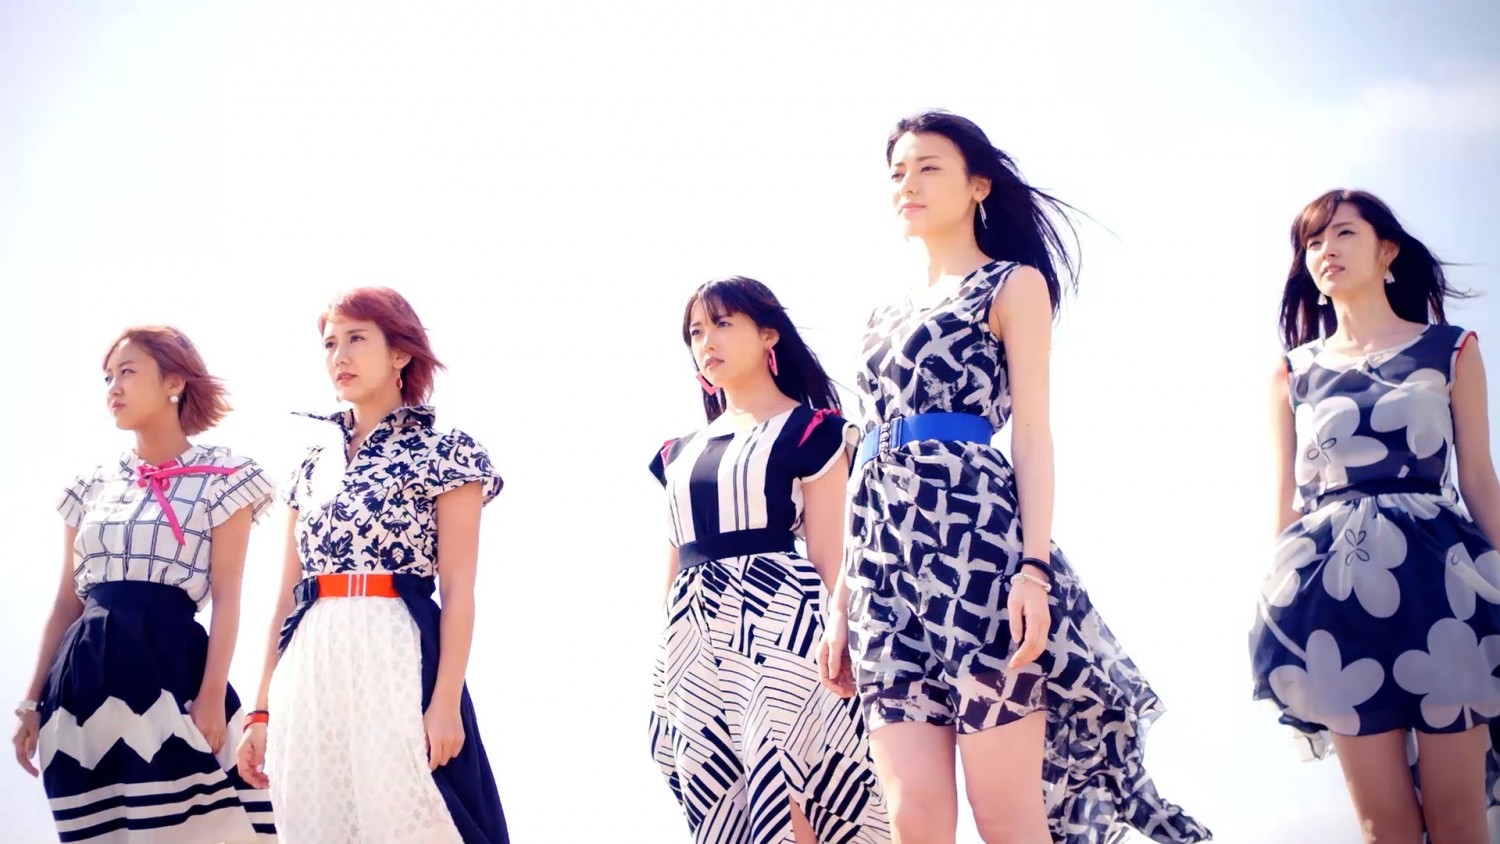 ℃-ute Reminisce by the Seashore in the MV for “Summer Wind”